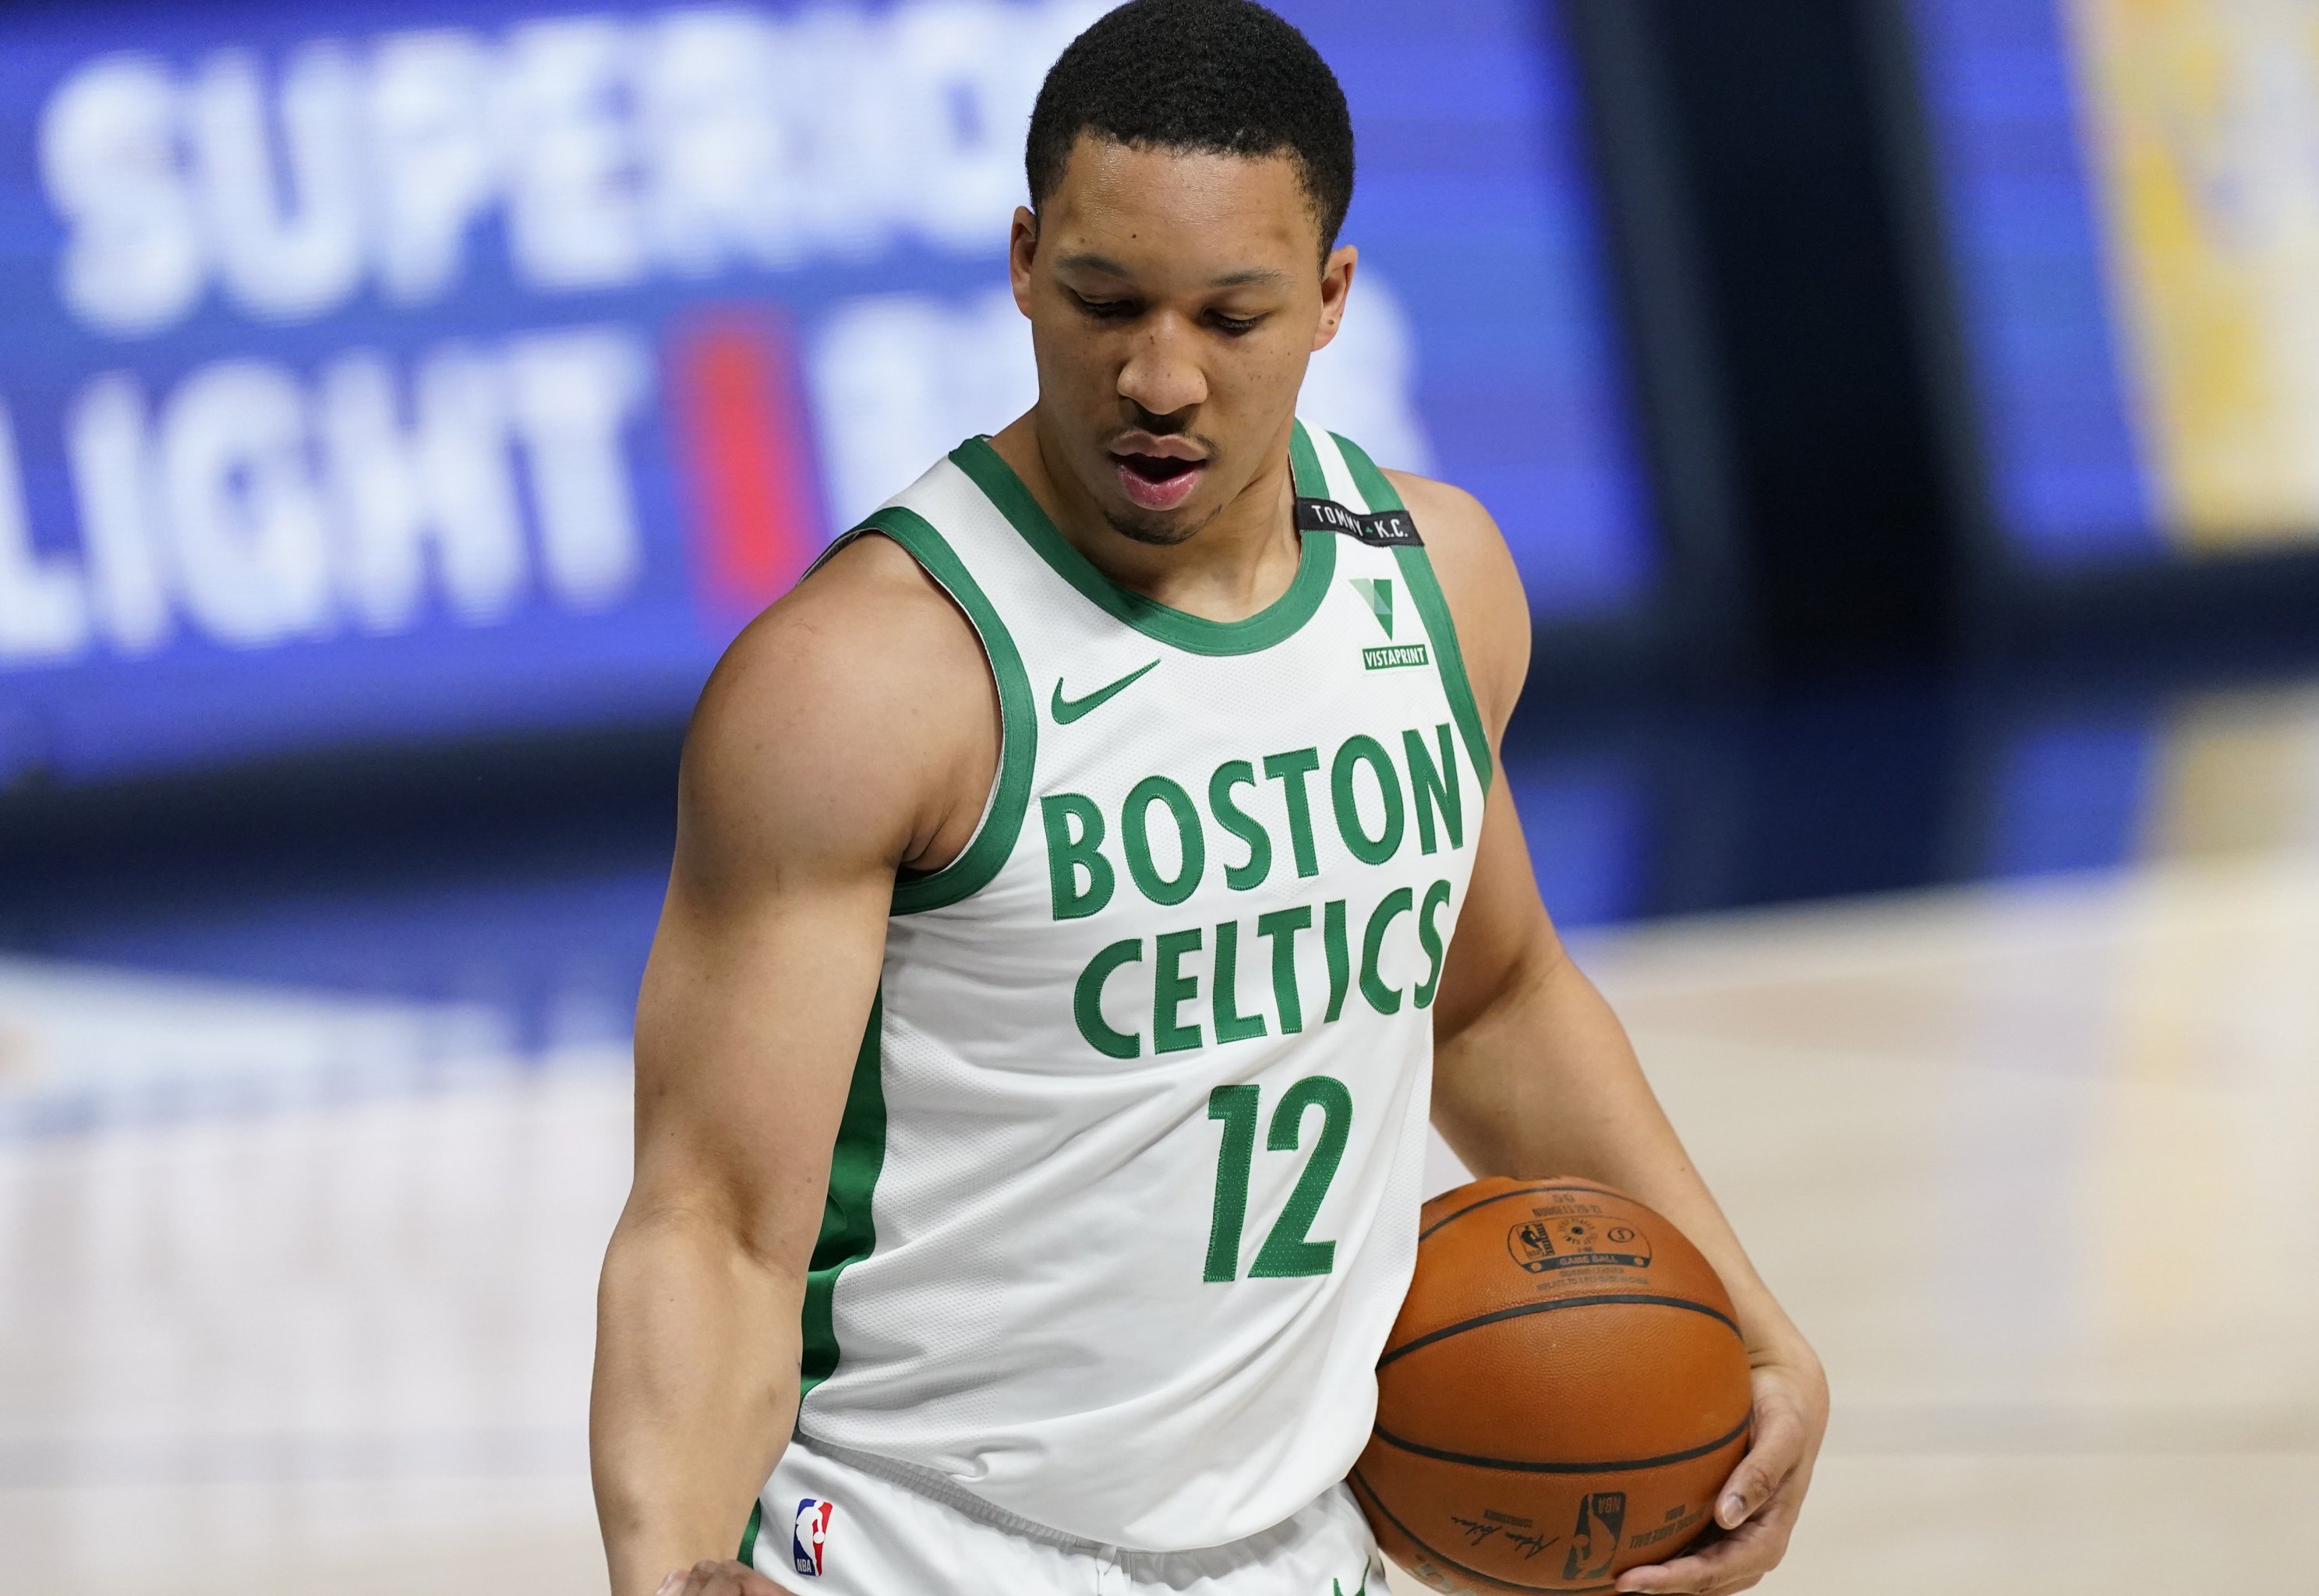 RJ Hunter and PJ Dozier choose jersey numbers of former Boston